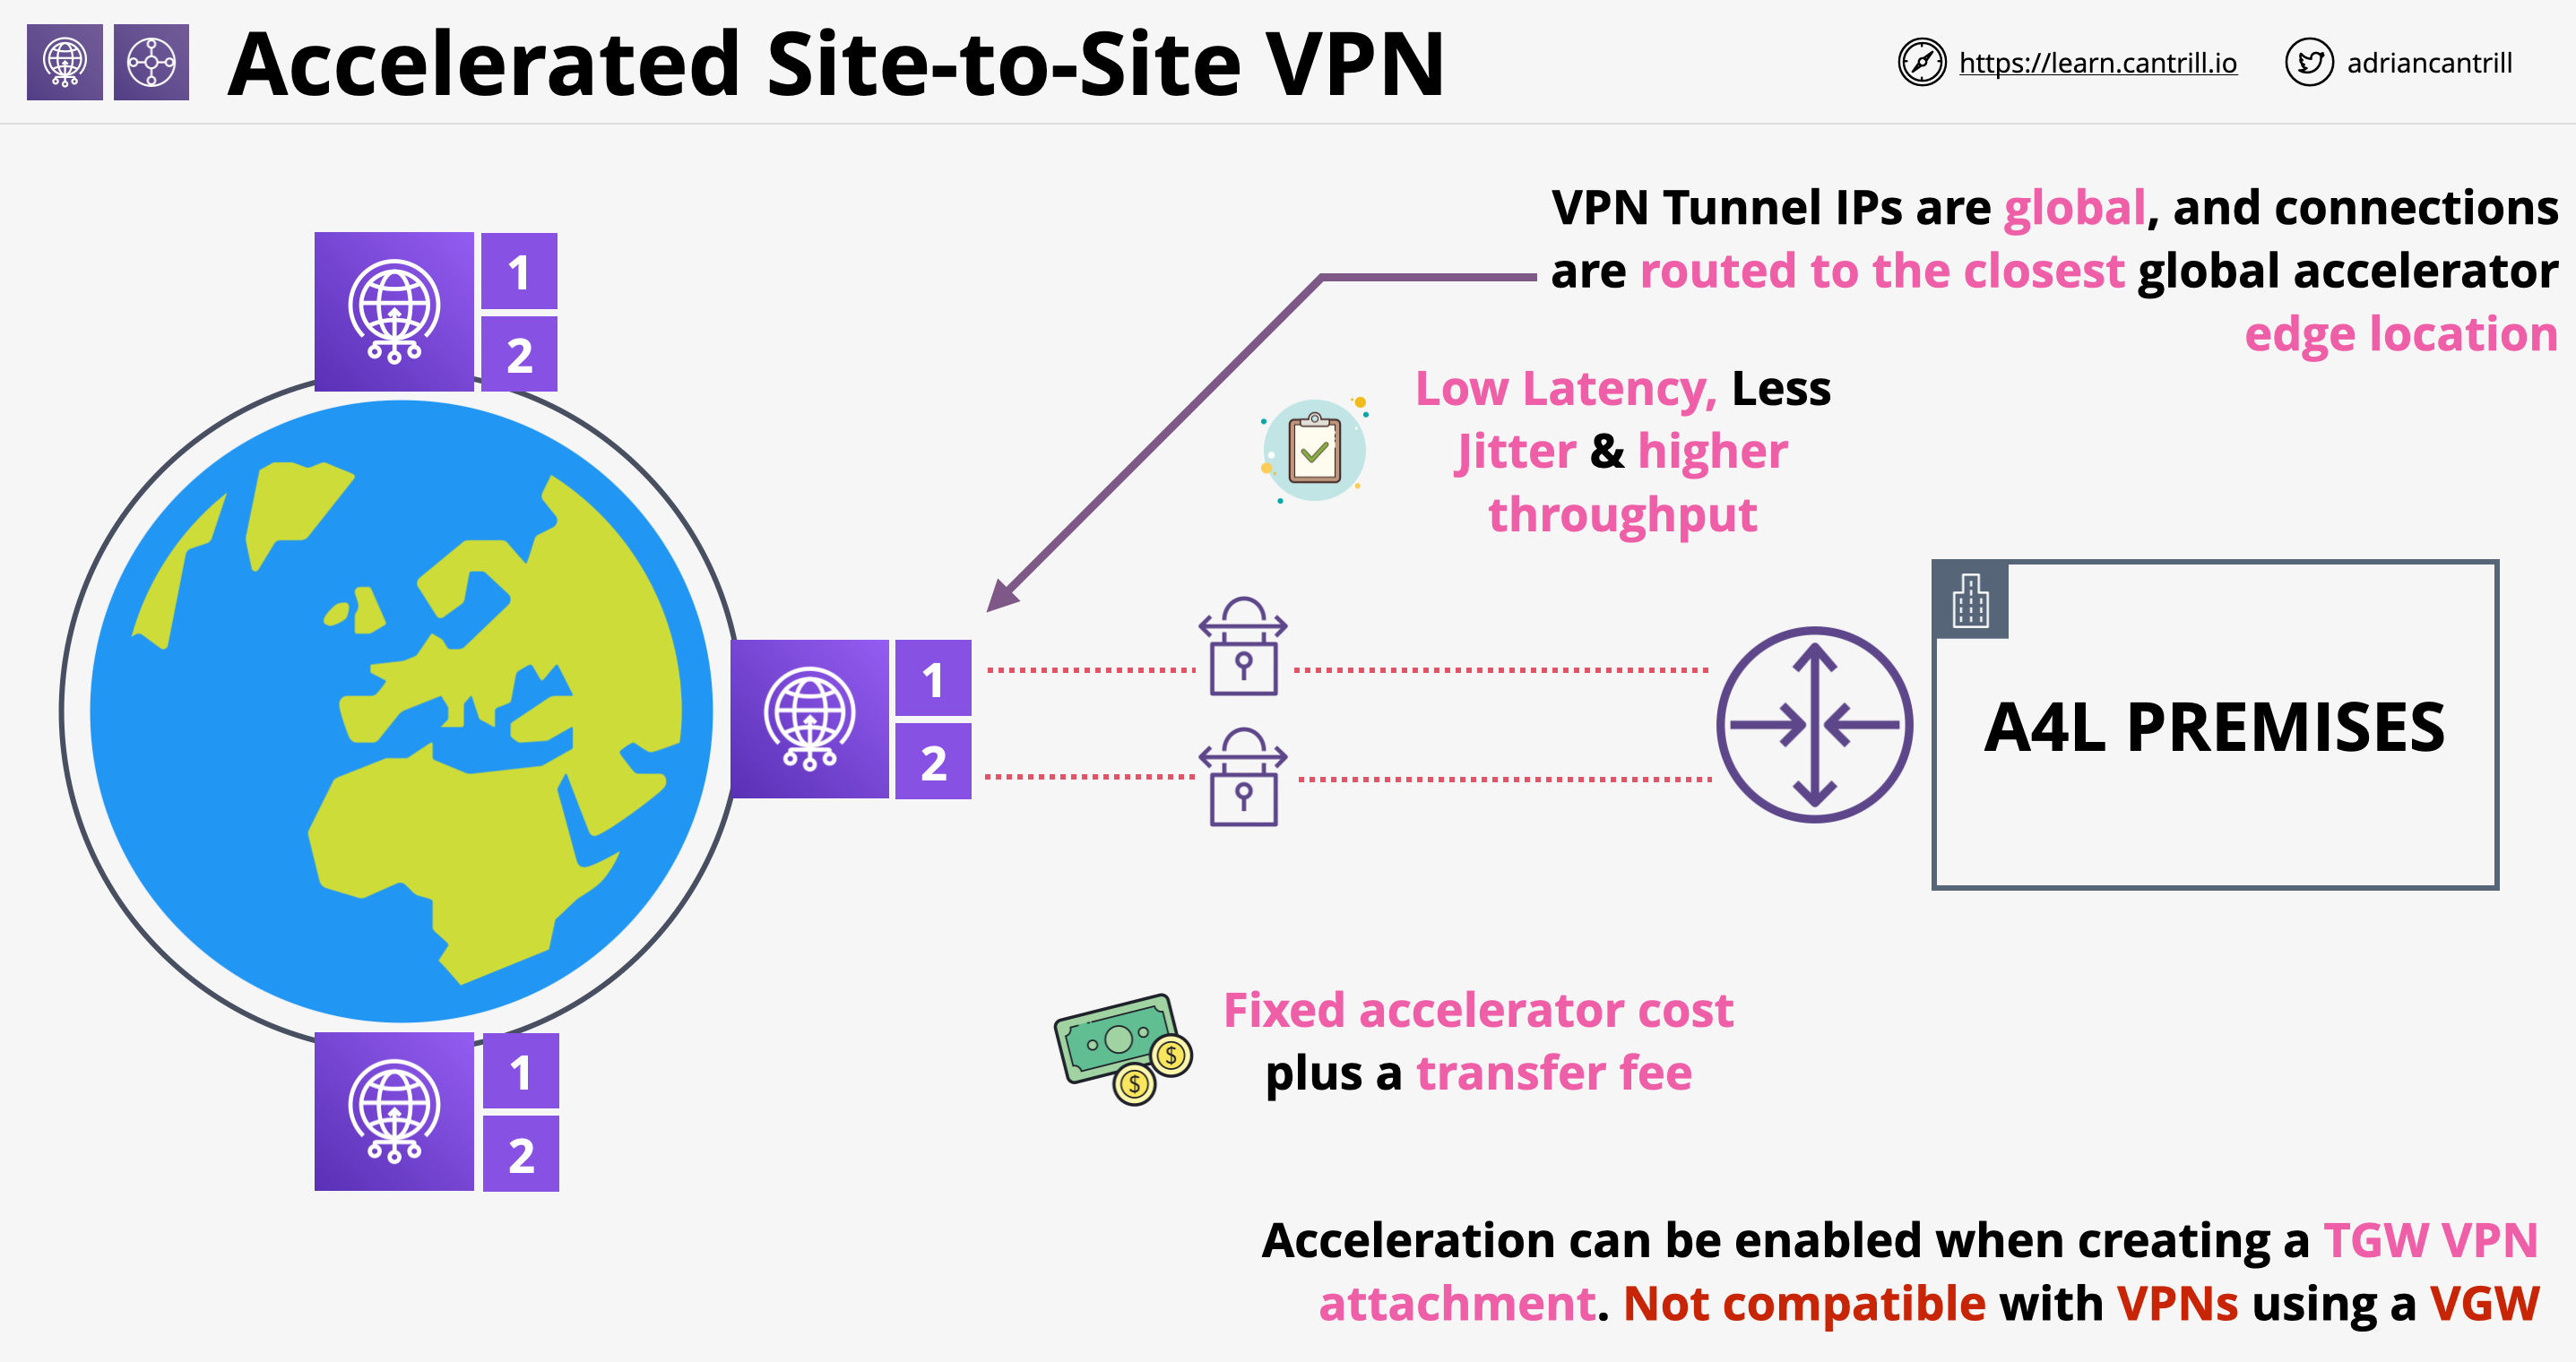 Accelerated Site-to-Site VPN